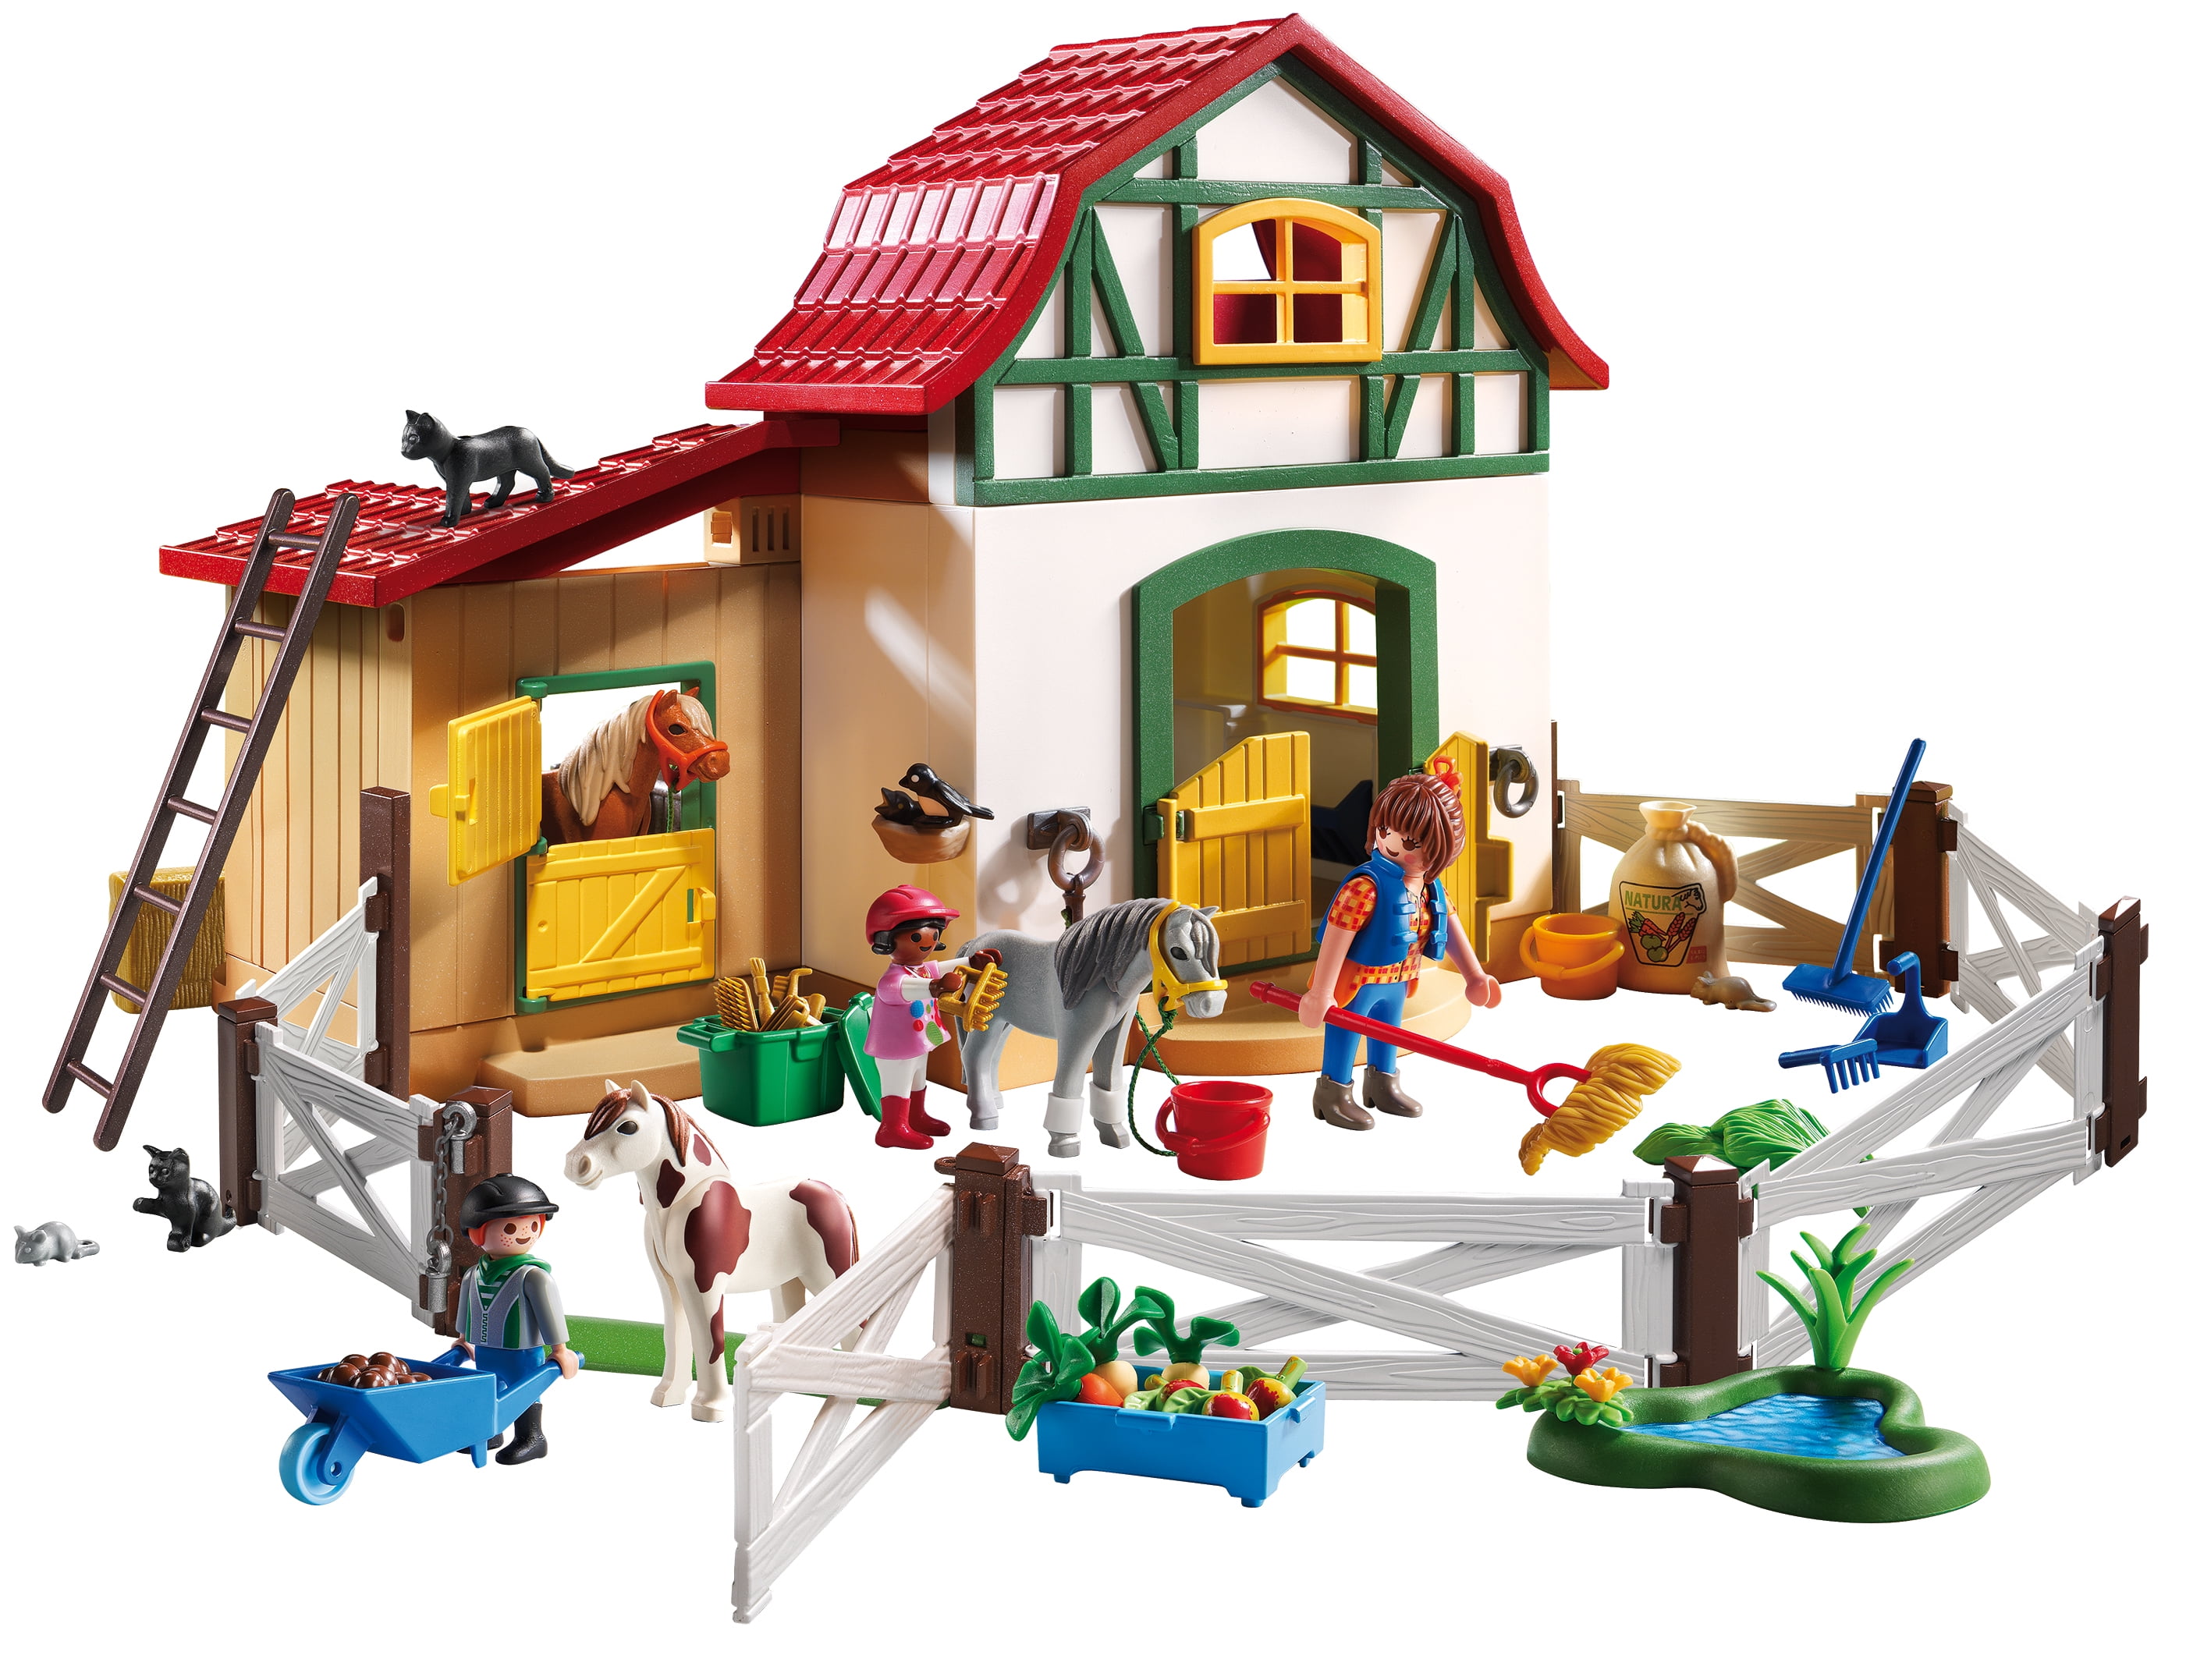 Playmobil Paddock fences with horse blanket NEW extras for farm/stables sets 